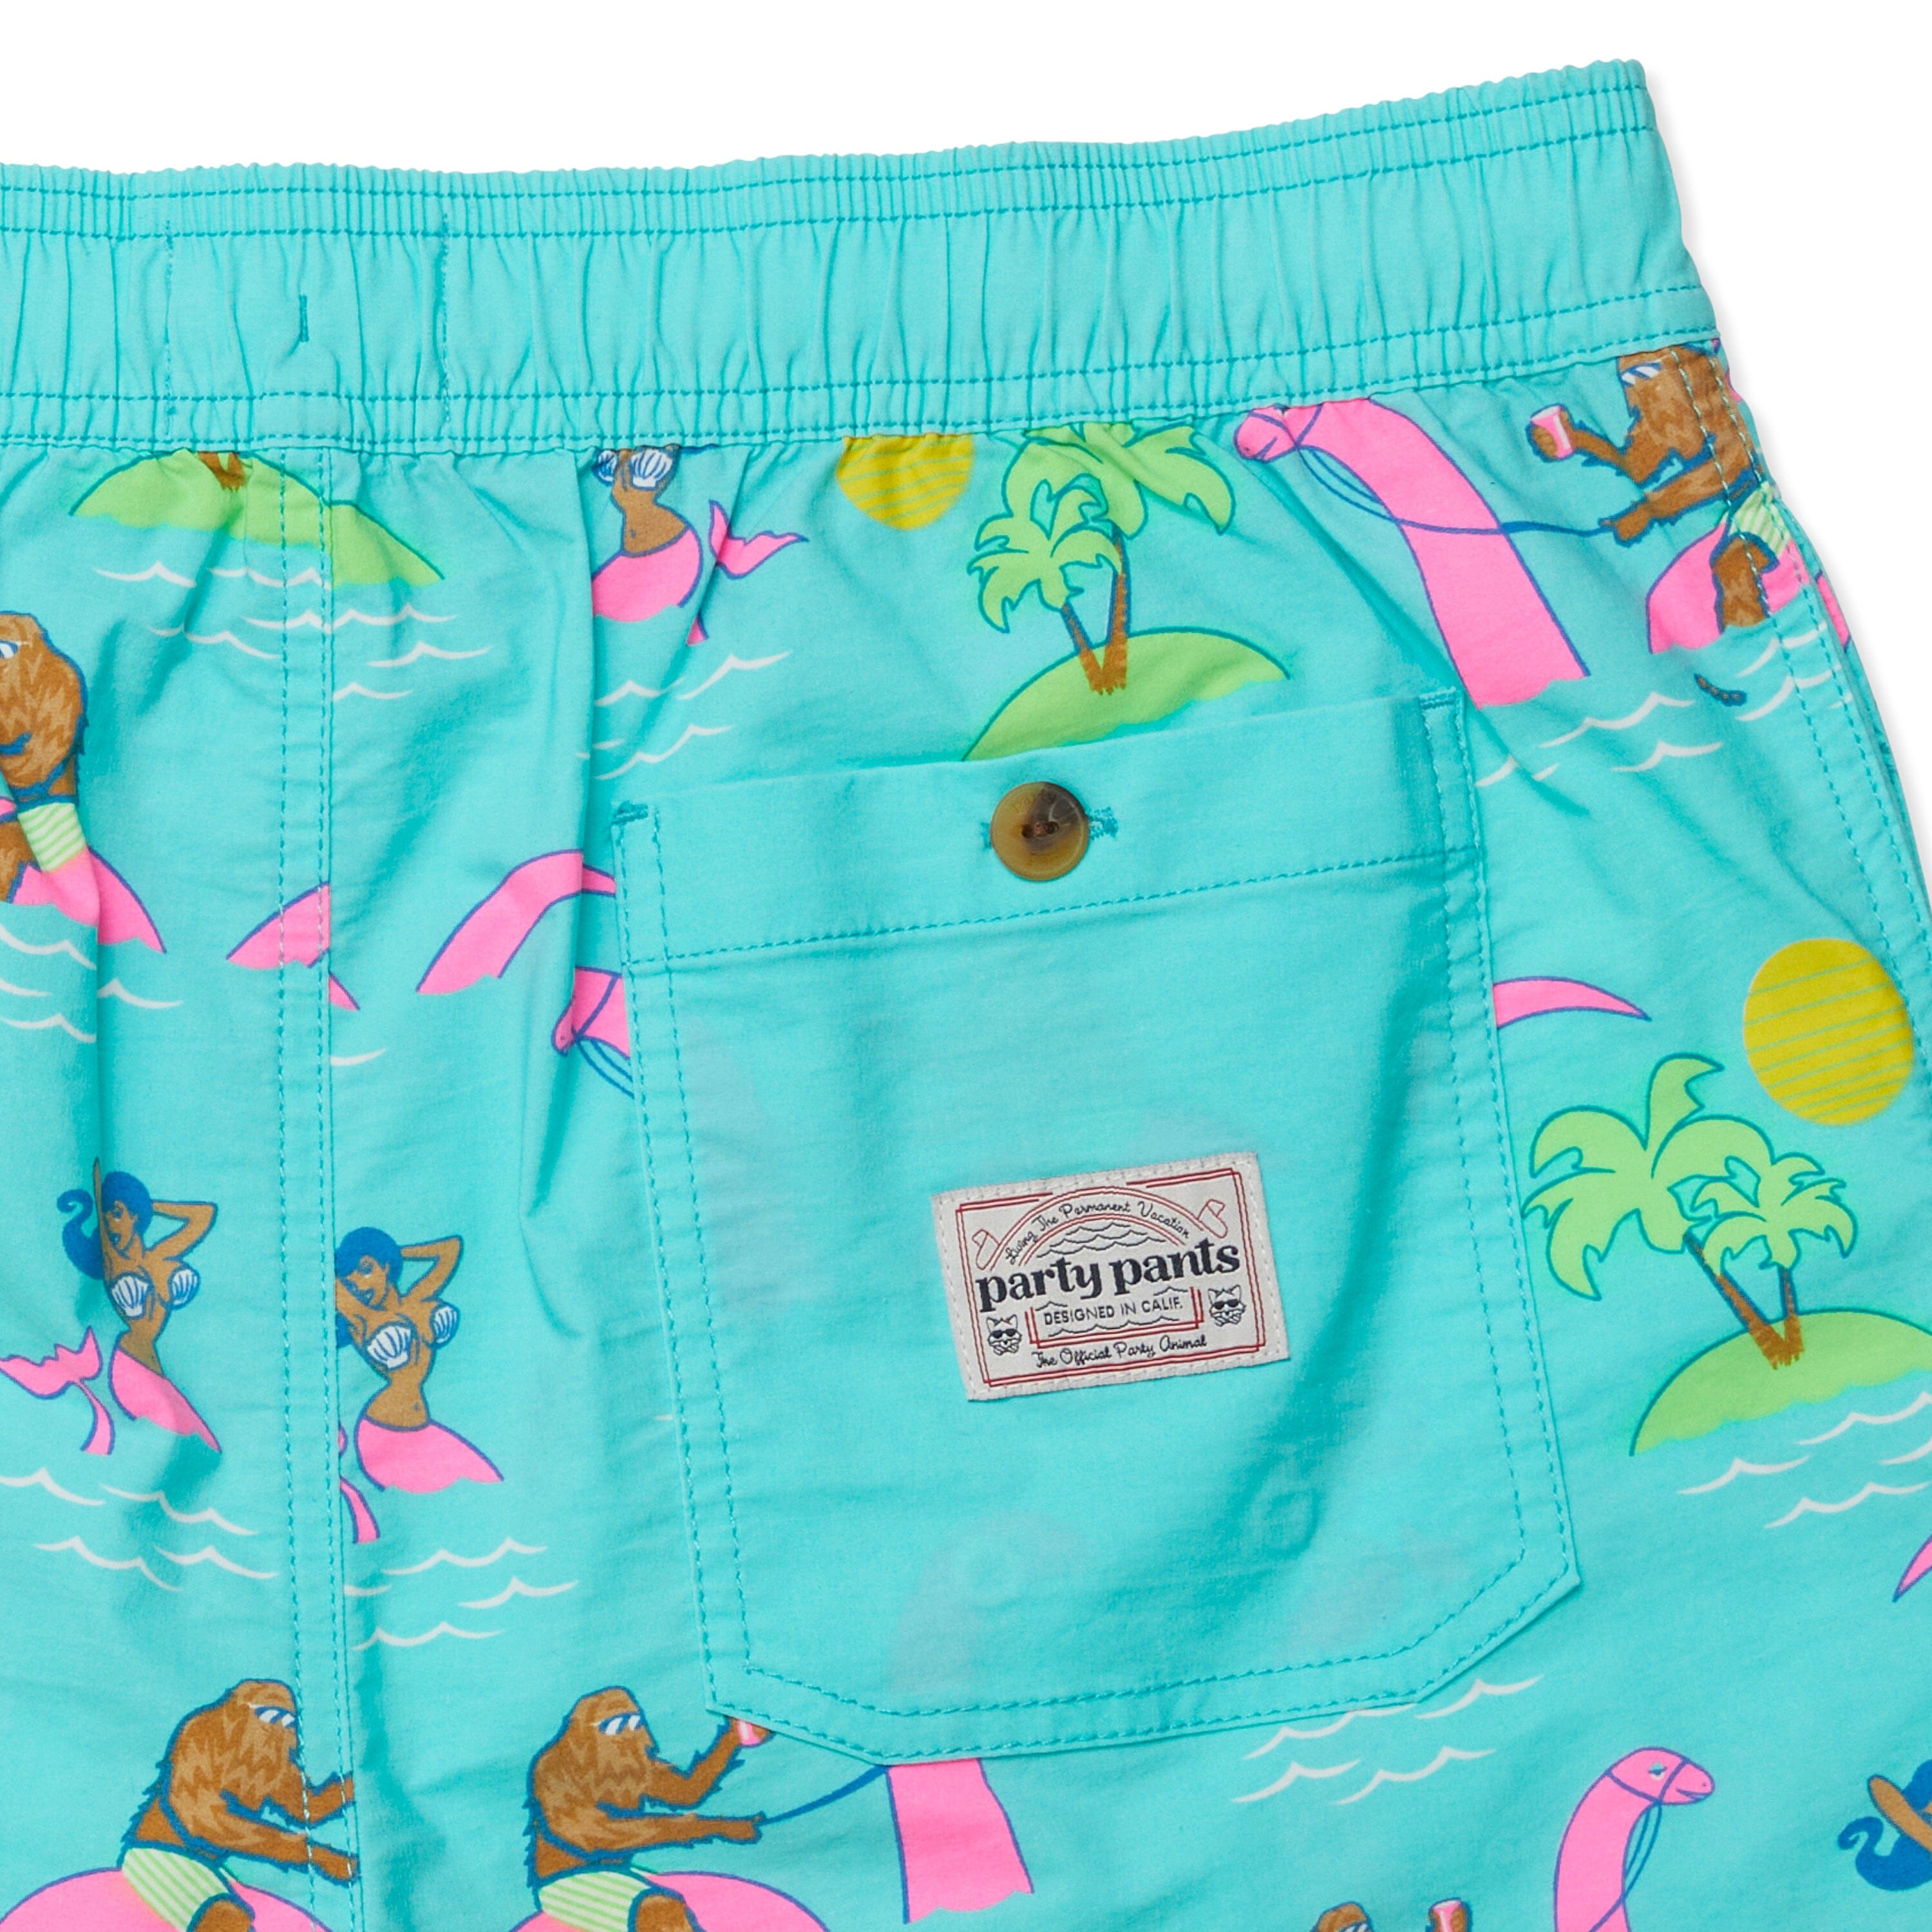 Party Pants Solid Sport Shorts for Men in Teal